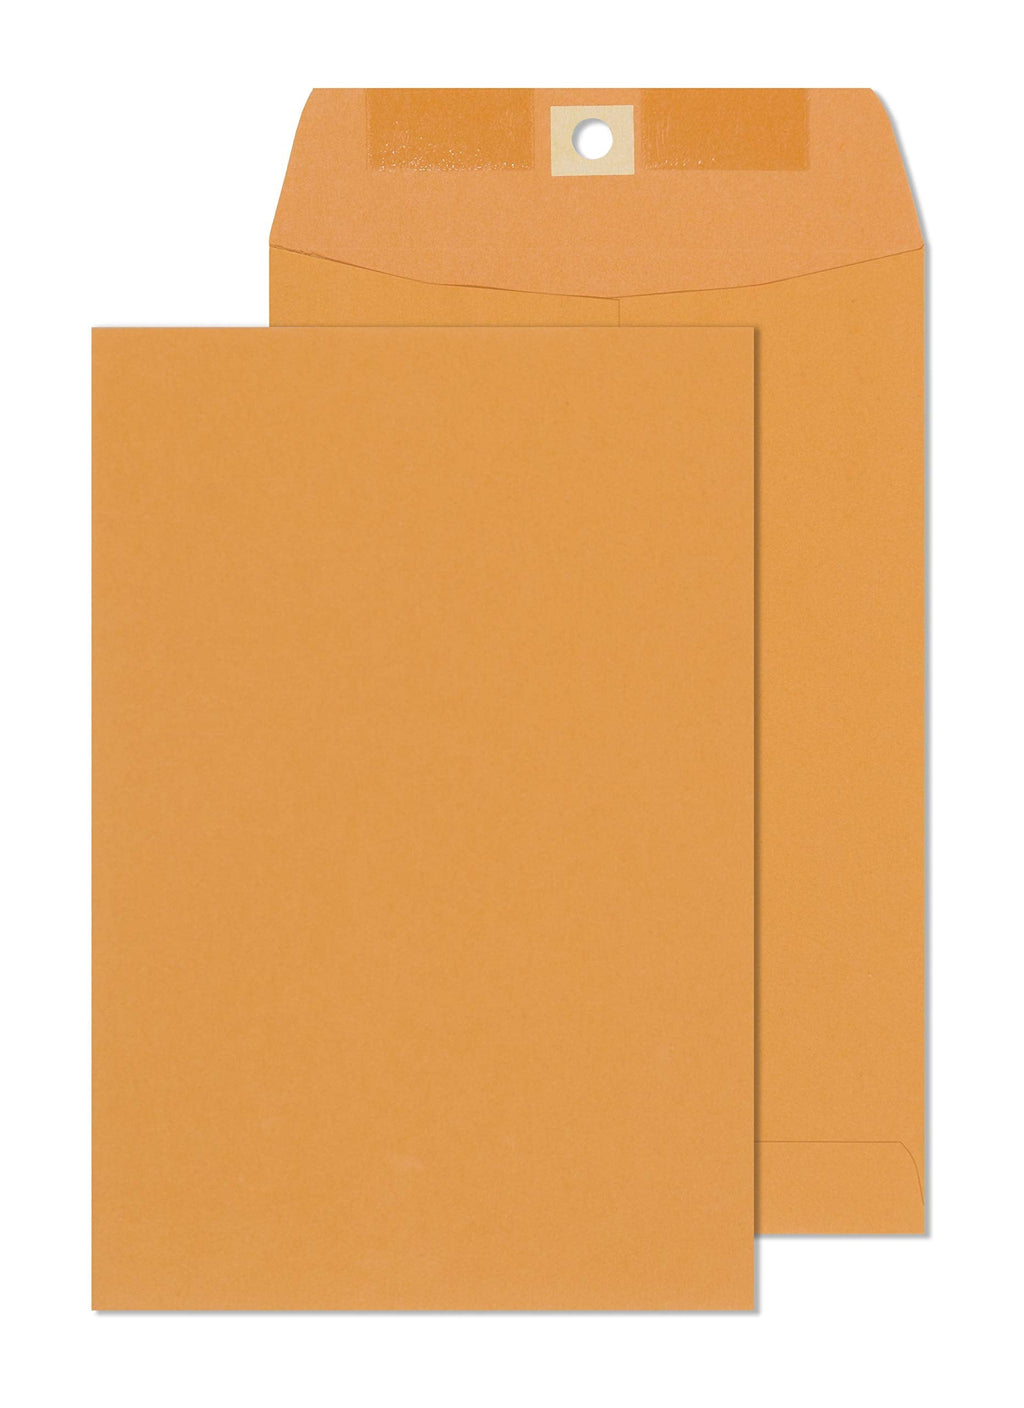 [Australia - AusPower] - Clasp Envelopes – 6x9 Inch Brown Kraft Catalog Envelopes - 30 Pack - With Clasp Closure & Gummed Seal – 28lb Heavyweight Paper Envelopes for Home, Office, Business, Legal or School. 